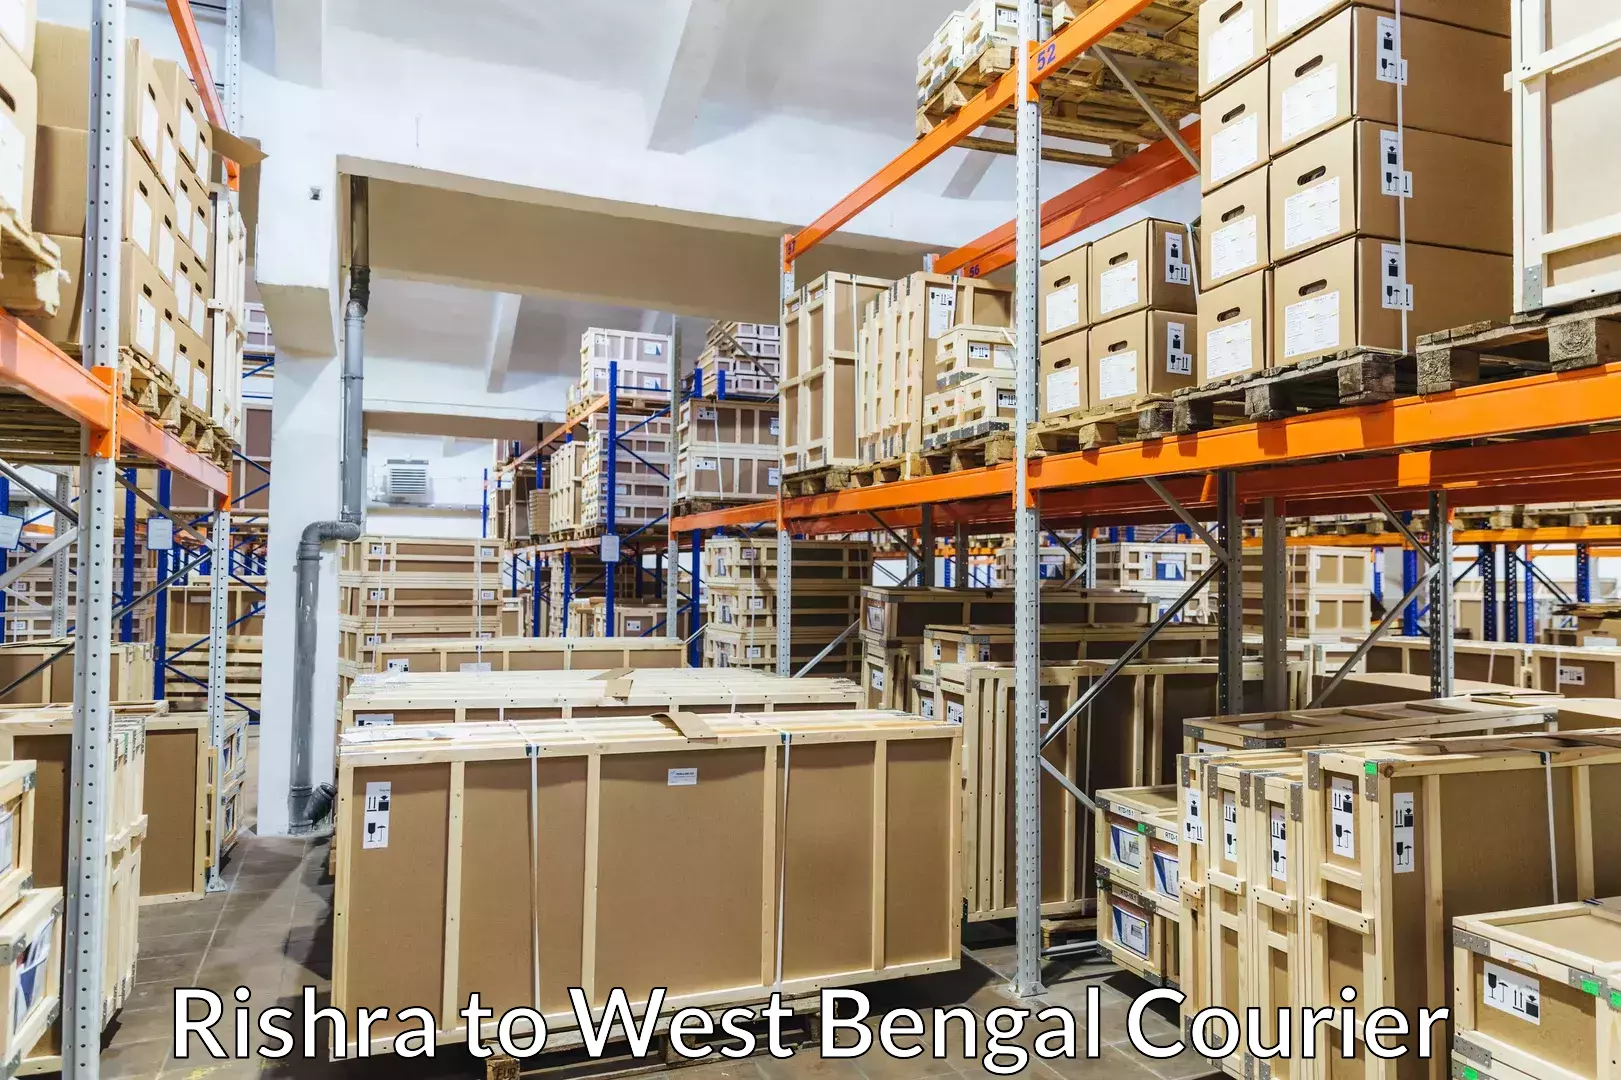 Luggage shipment specialists Rishra to West Bengal